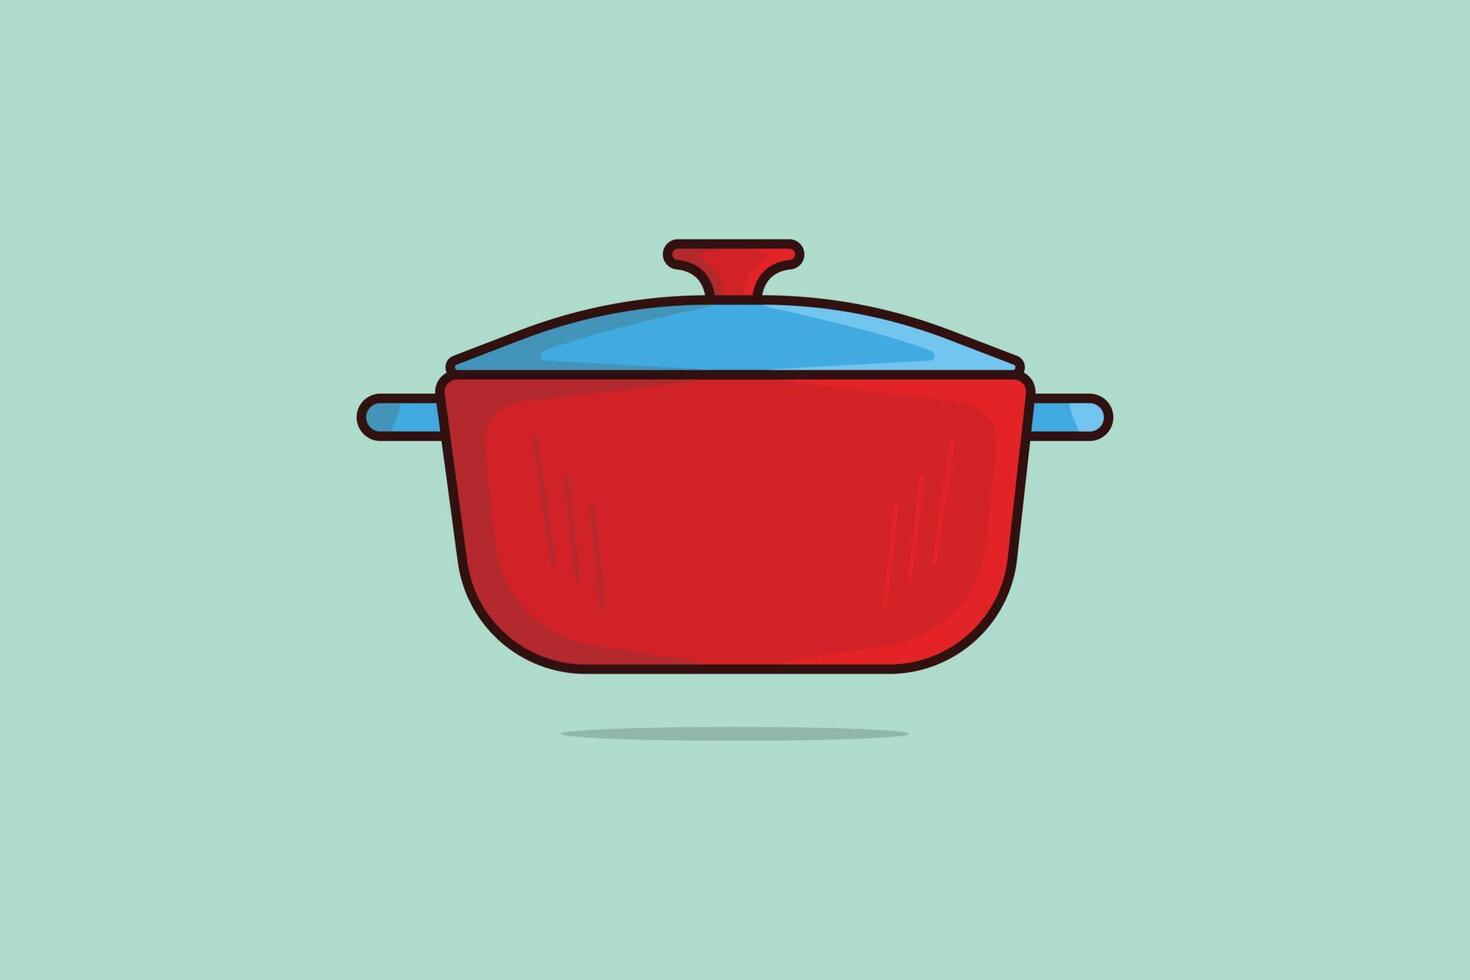 Casserole Dish Kitchen Cooking Pot vector illustration. Kitchen appliance element icon concept. Pan with lid for dishes, kitchen, home cooking vector design with shadow on light green background.